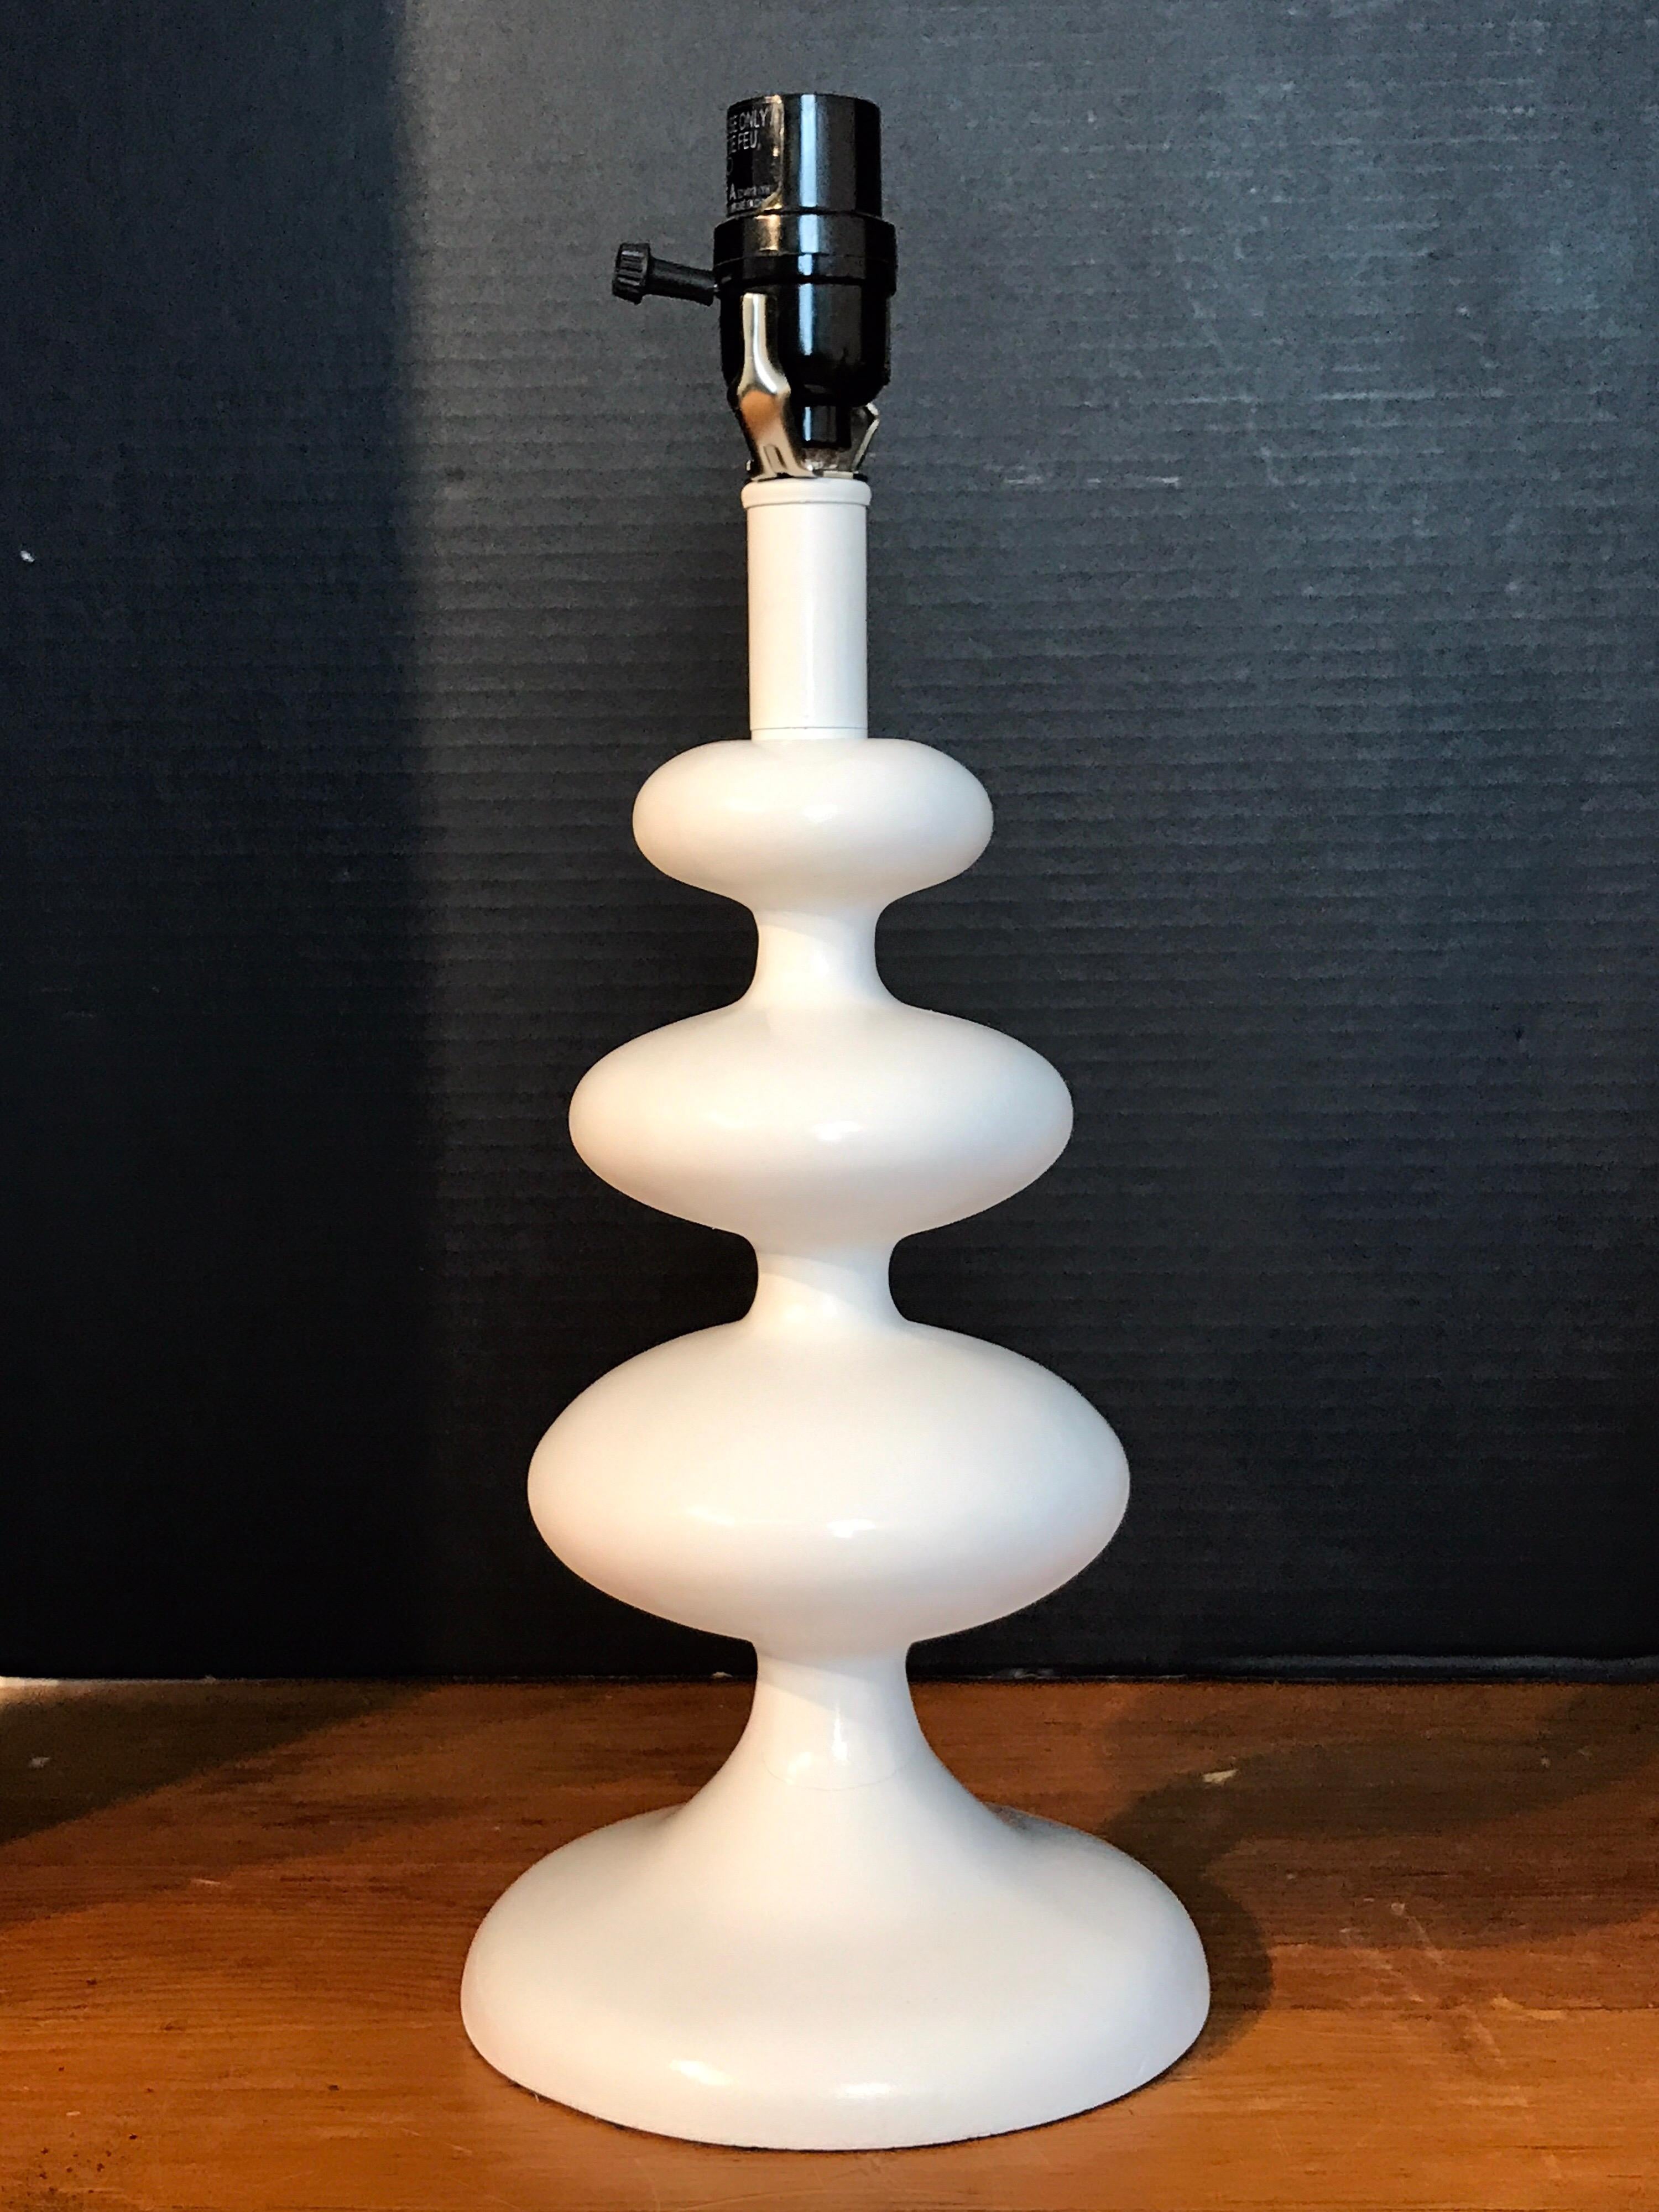 Midcentury Biomorphic style table lamp, sculptural in the manner of Albert or Diego Giacometti
2